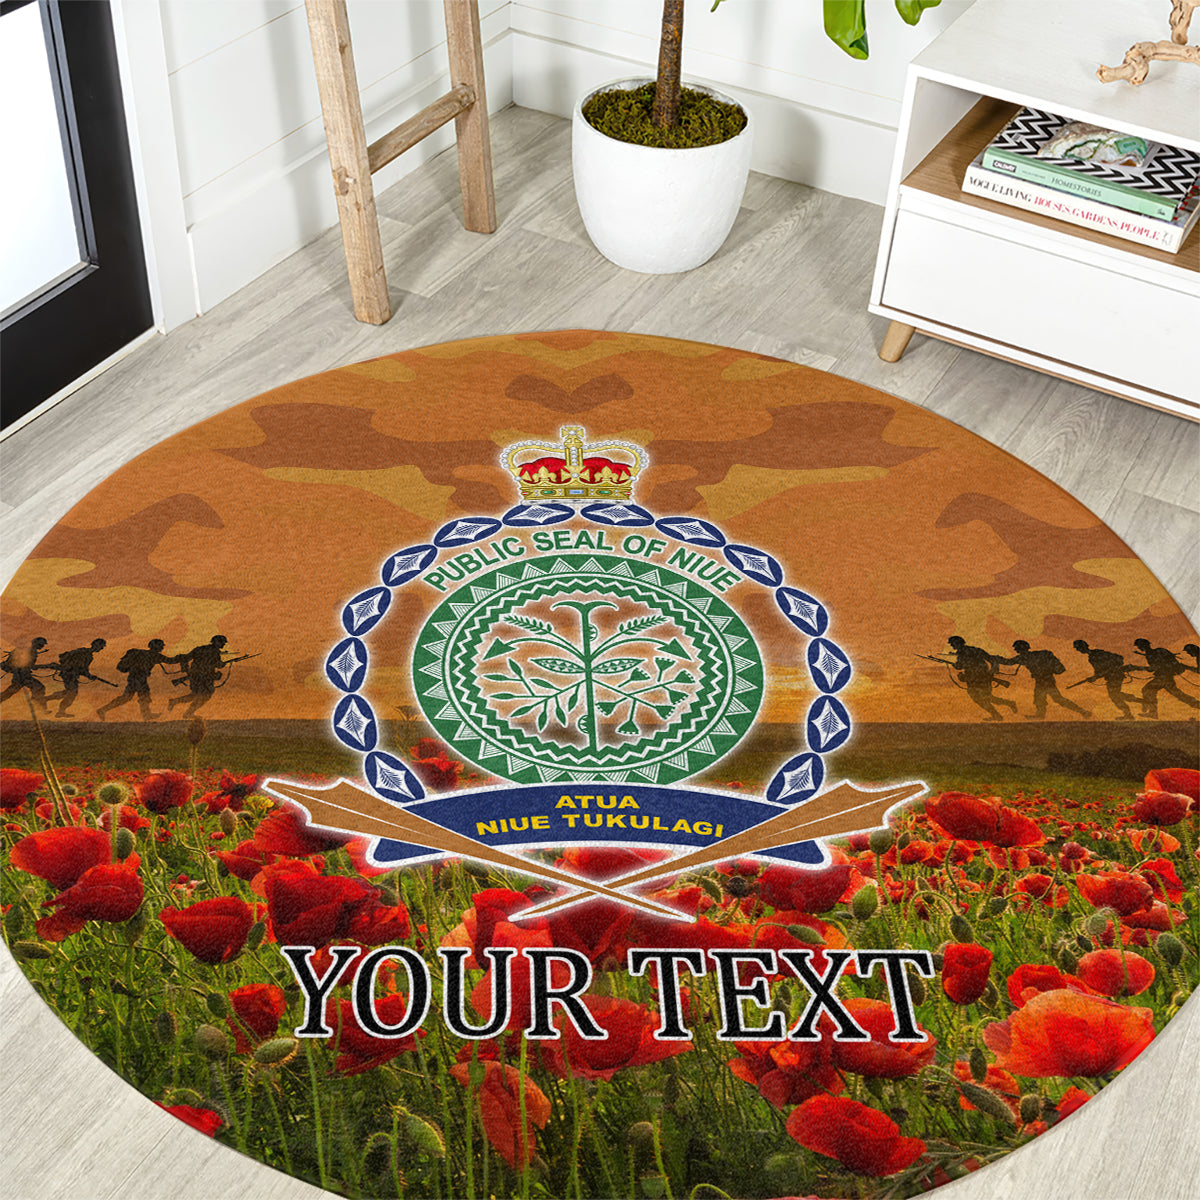 Niue ANZAC Day Personalised Round Carpet with Poppy Field LT9 Art - Polynesian Pride